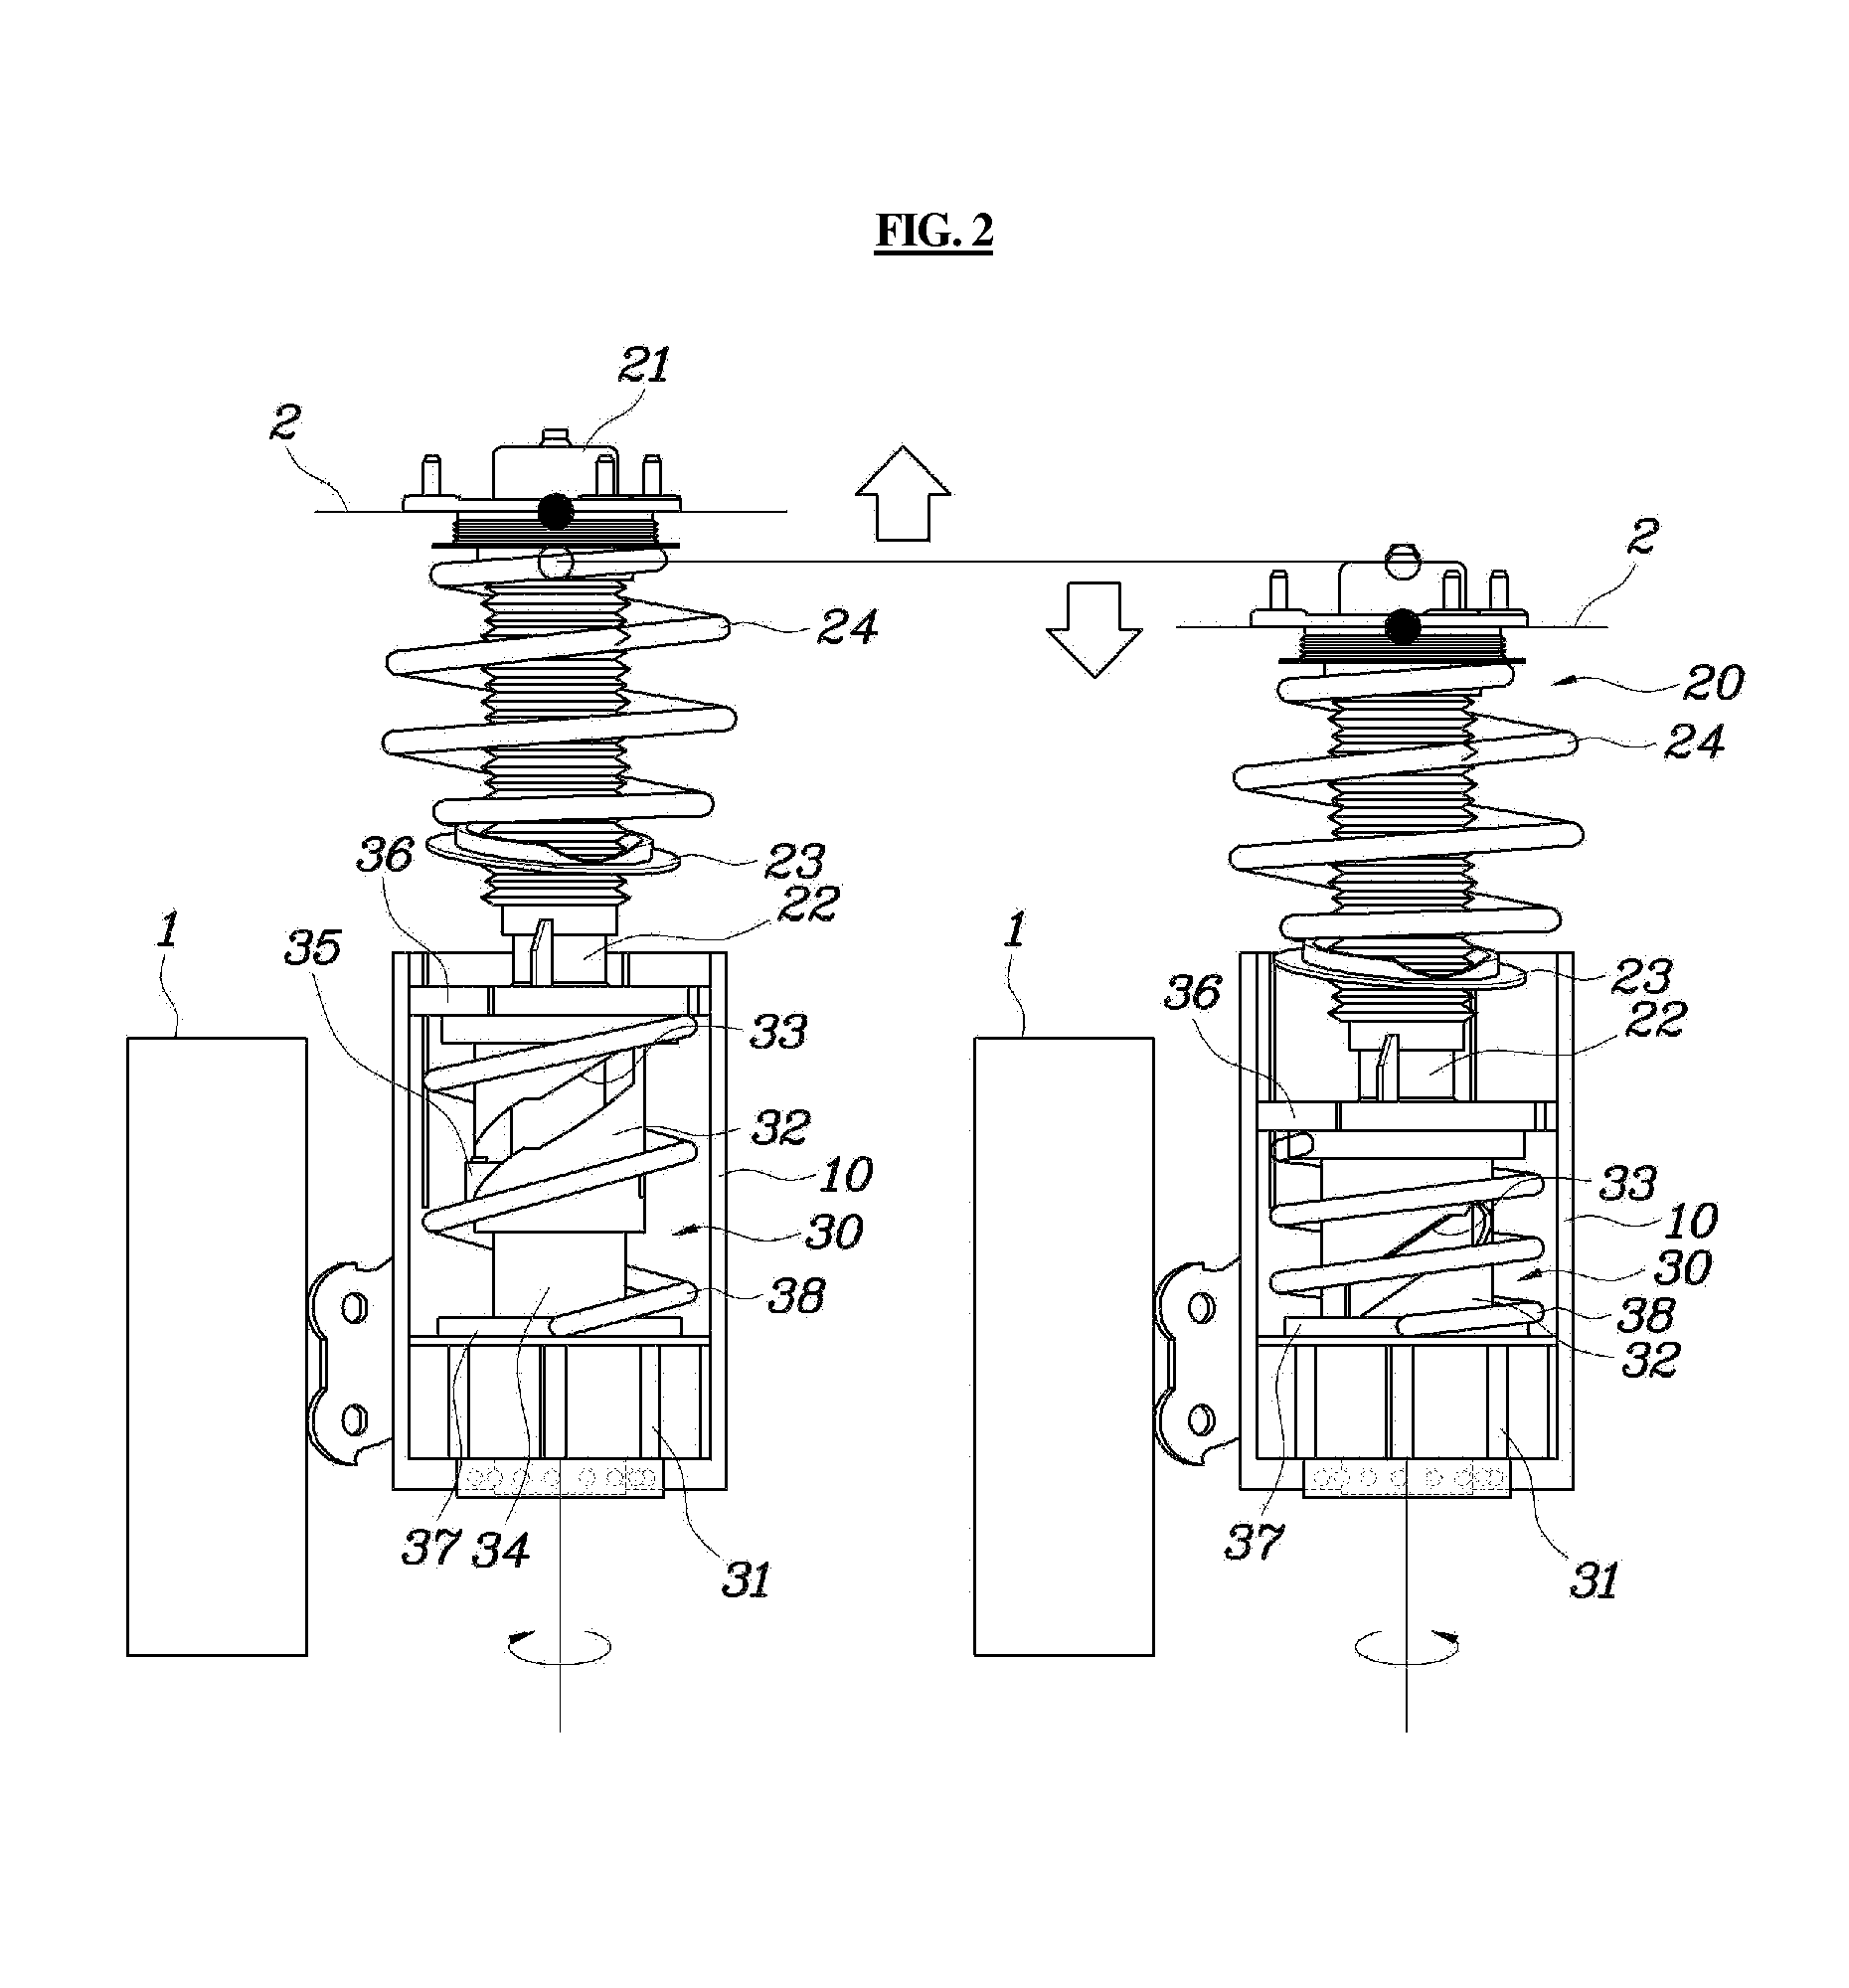 Electronic control suspension system for vehicles